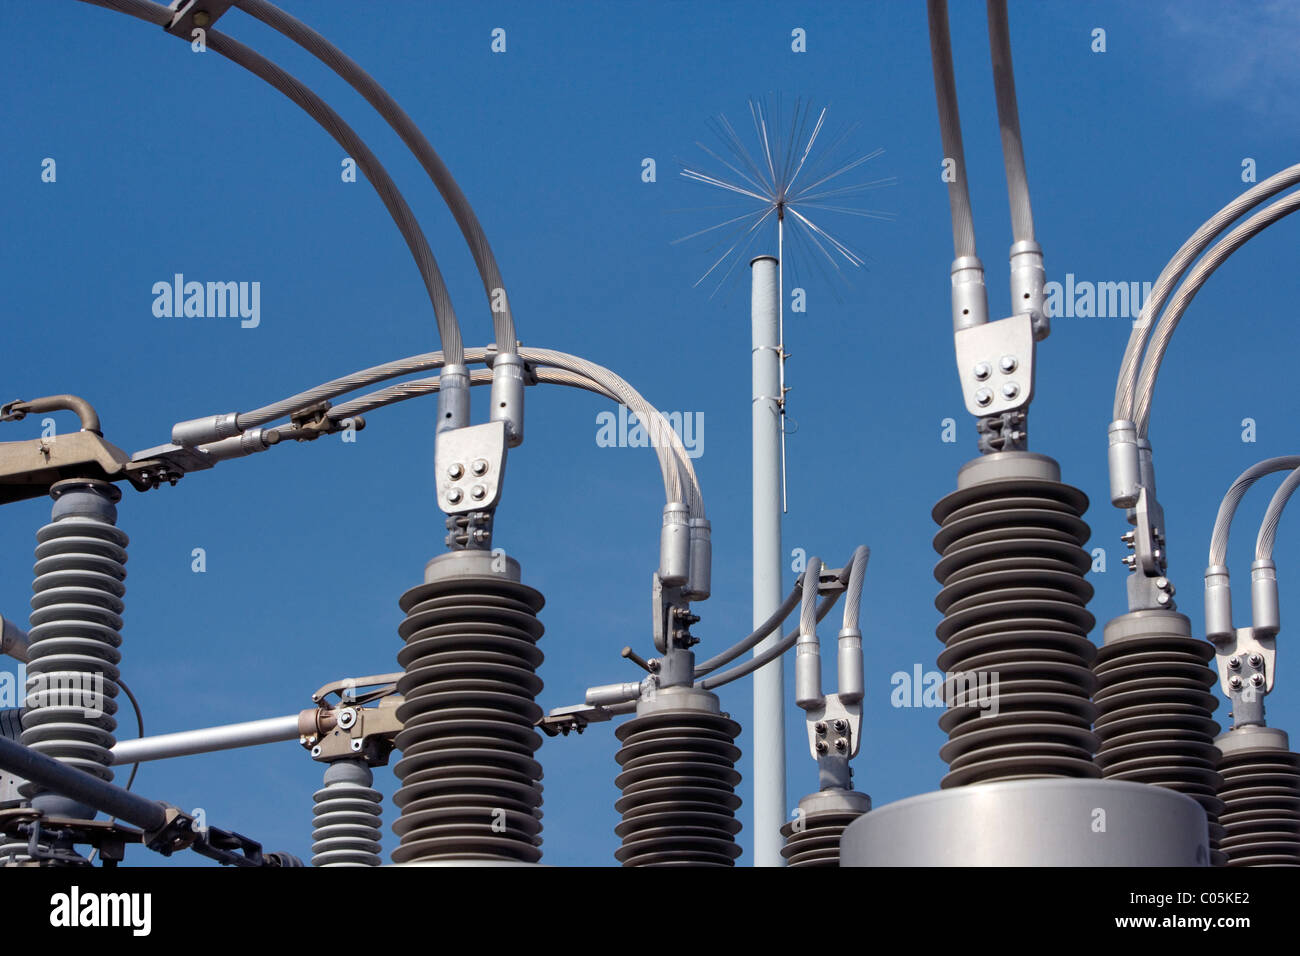 A lightning arrestor or dissipator atop an electrical power transfer station. Stock Photo